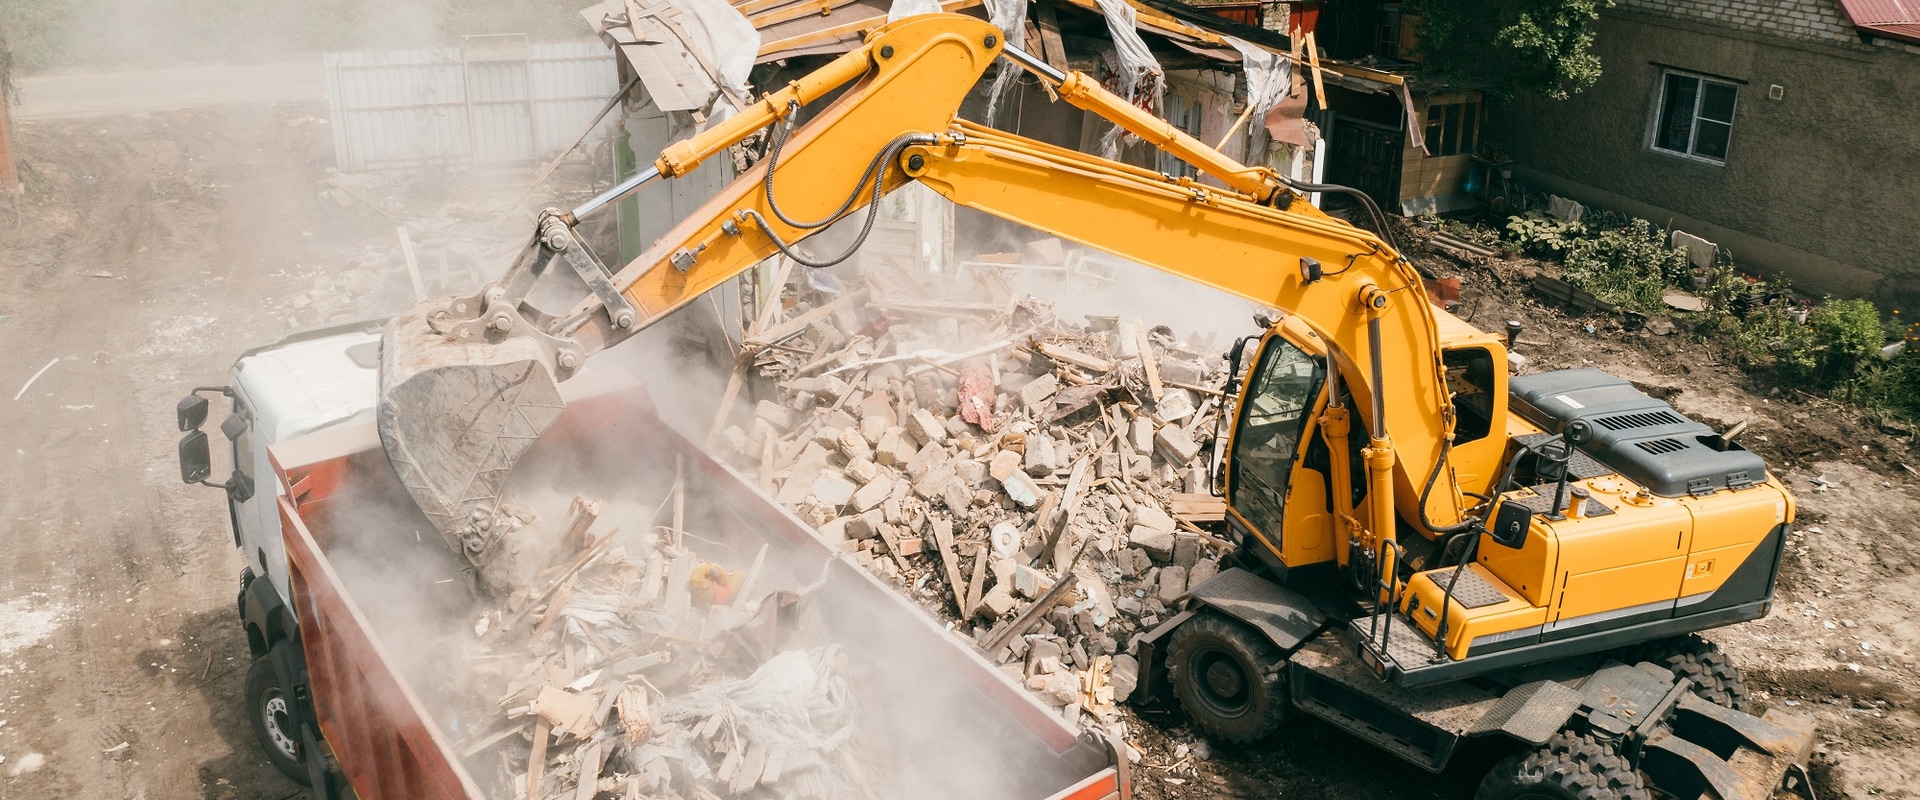 Creating a Sustainable Home: A Complete Guide to Construction Waste Management Plans